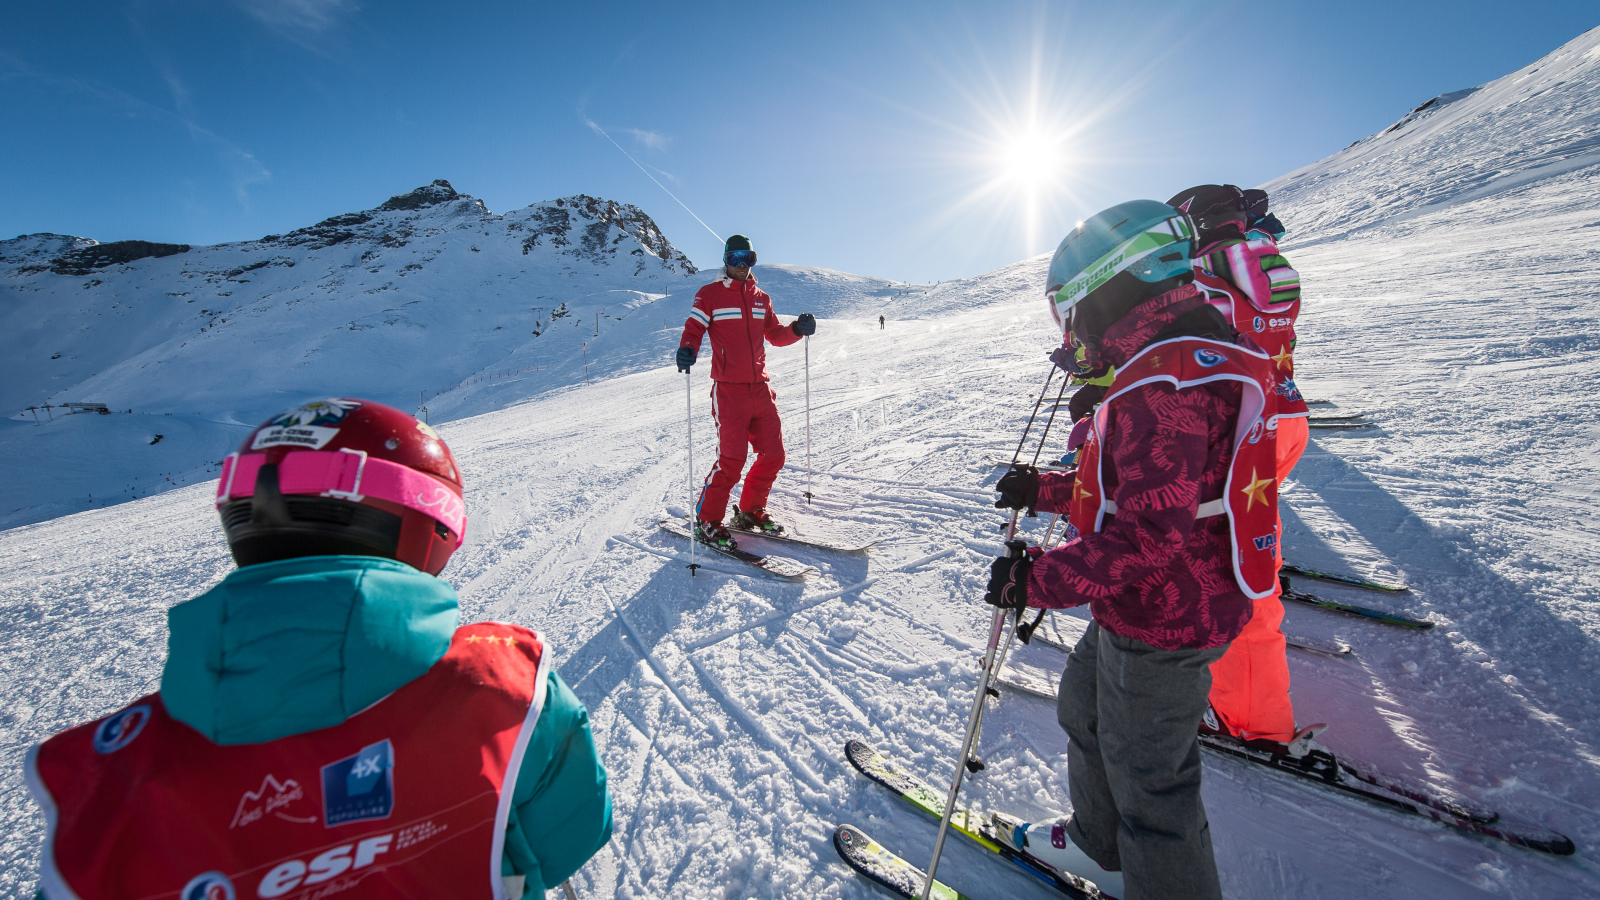 ESF Val Cenis, for the pleasure of skiing in group lessons